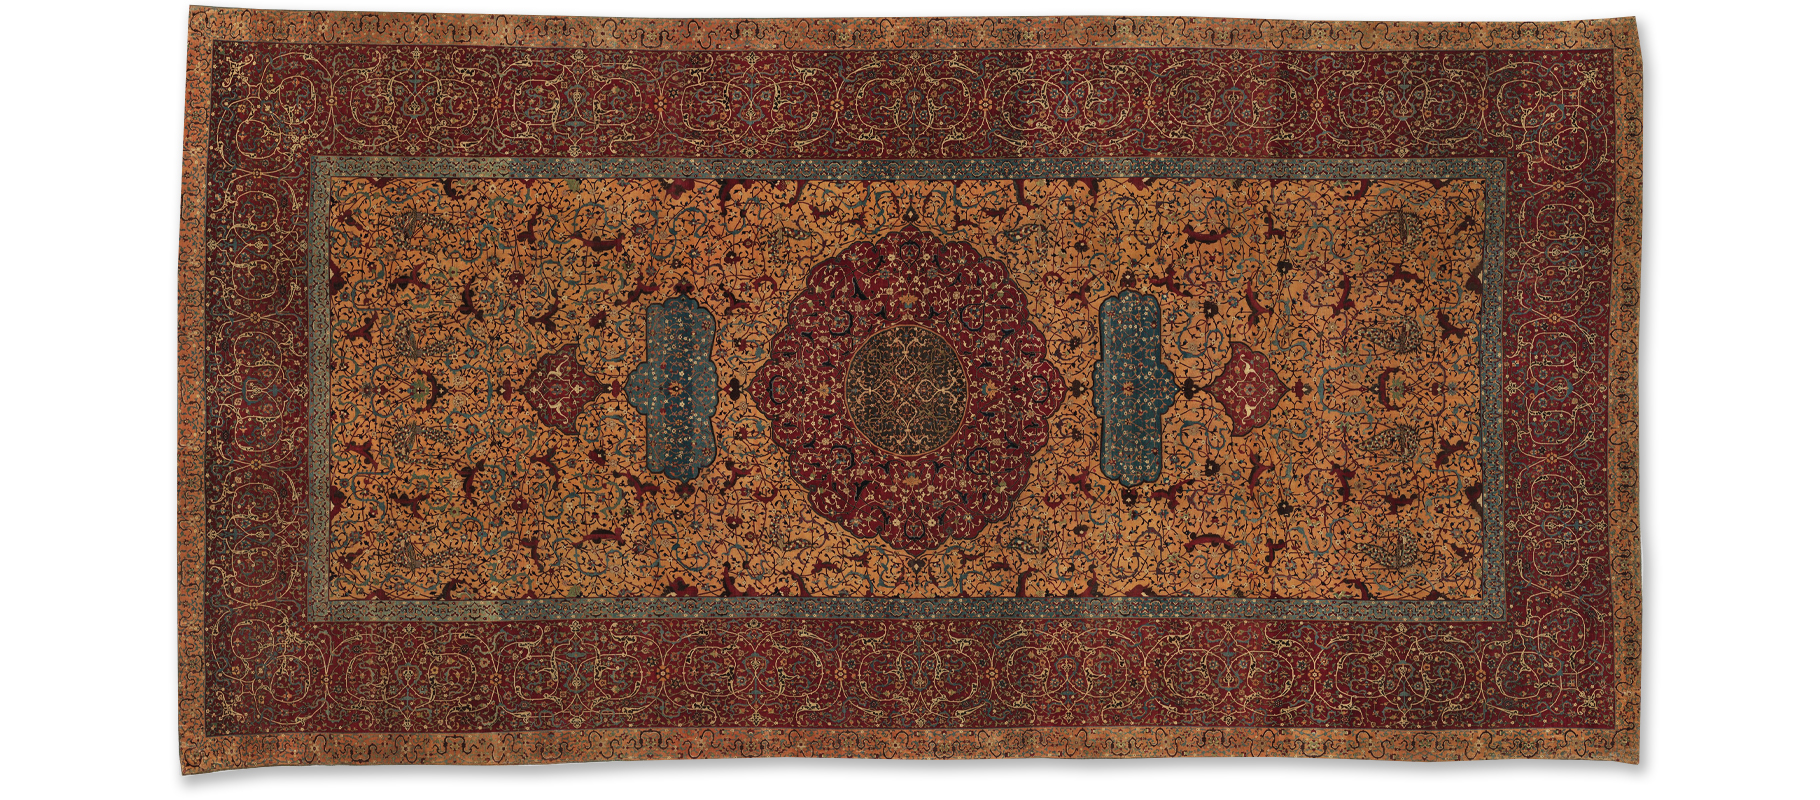 The history of Persian Rugs